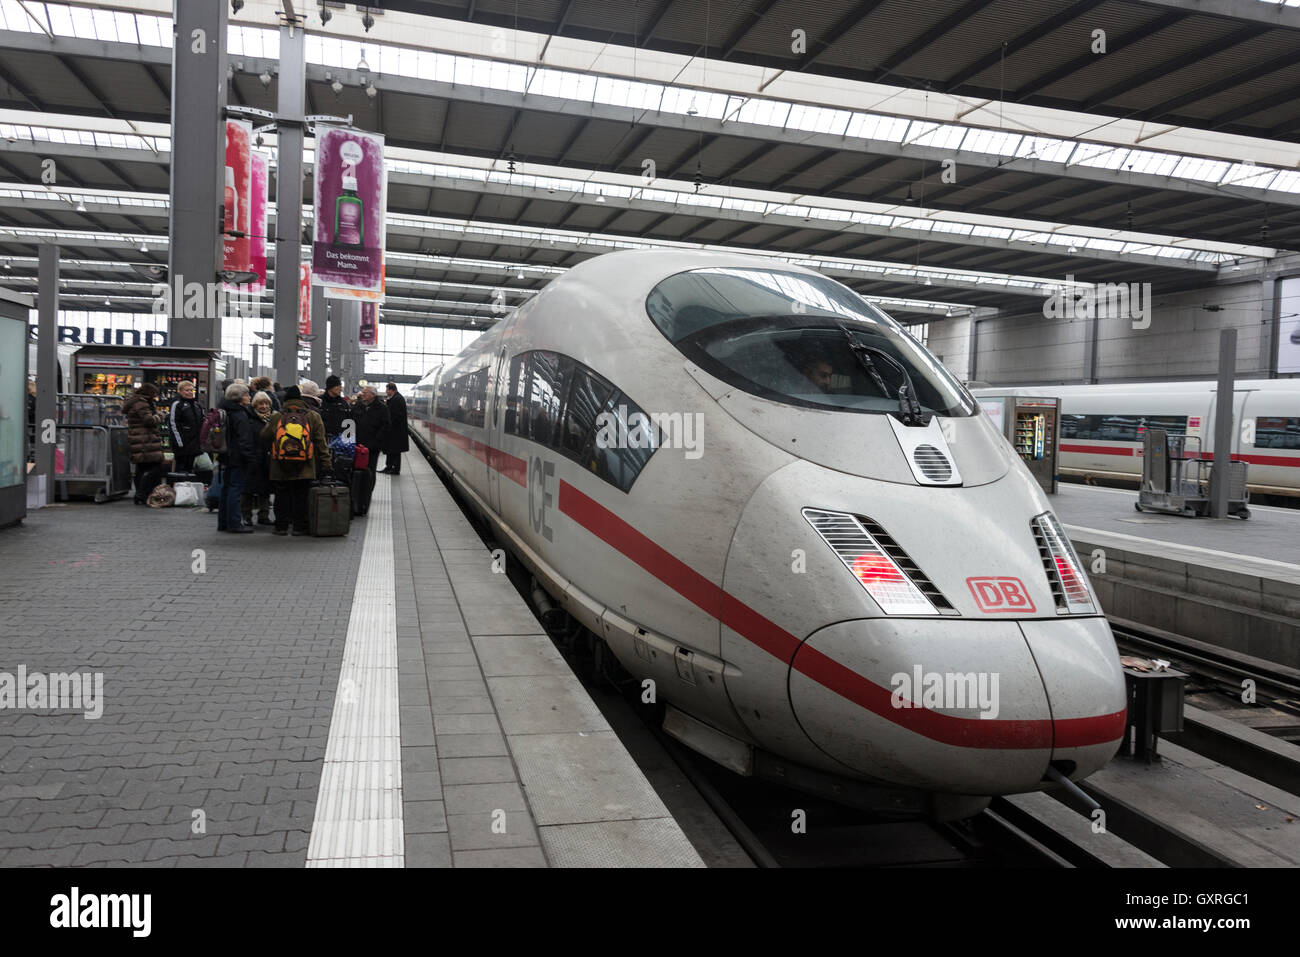 A DB ICE ( Inter City Express) passenger train at Munich mainline station in Germany Stock Photo